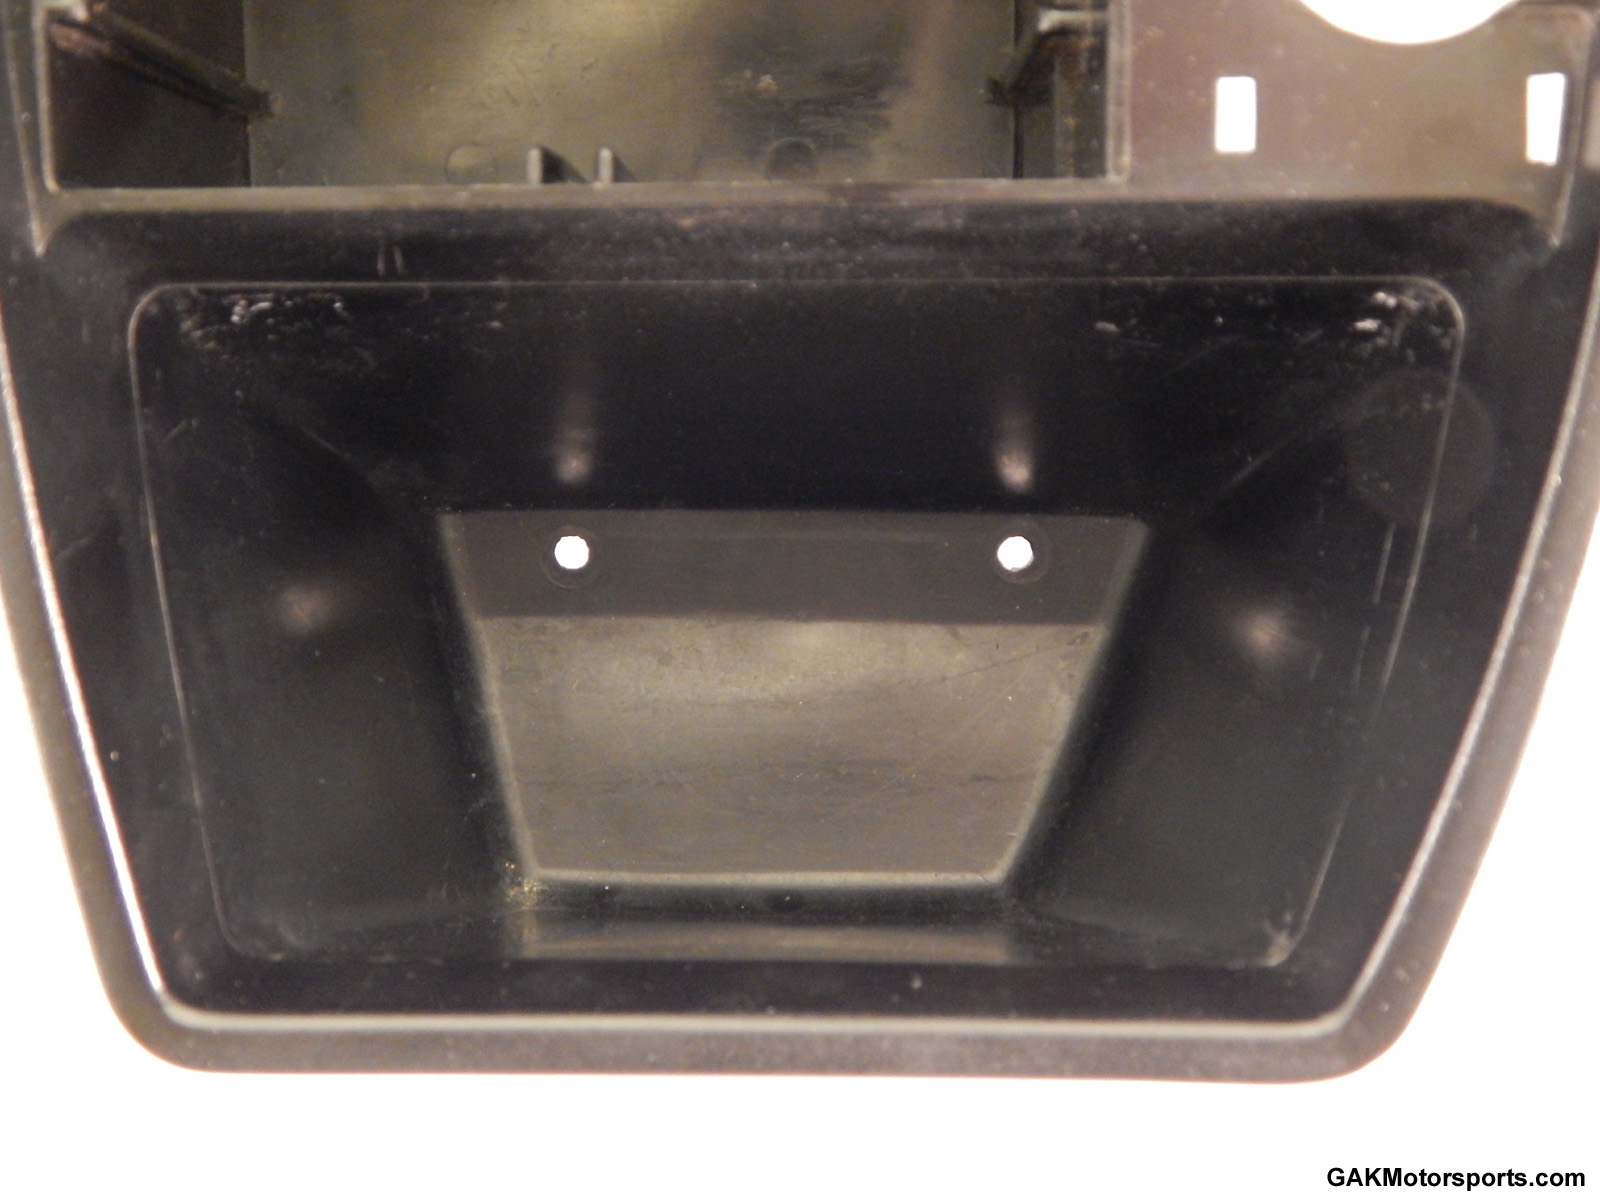 The gauge panel fits approximately where the mold line is inside the console.